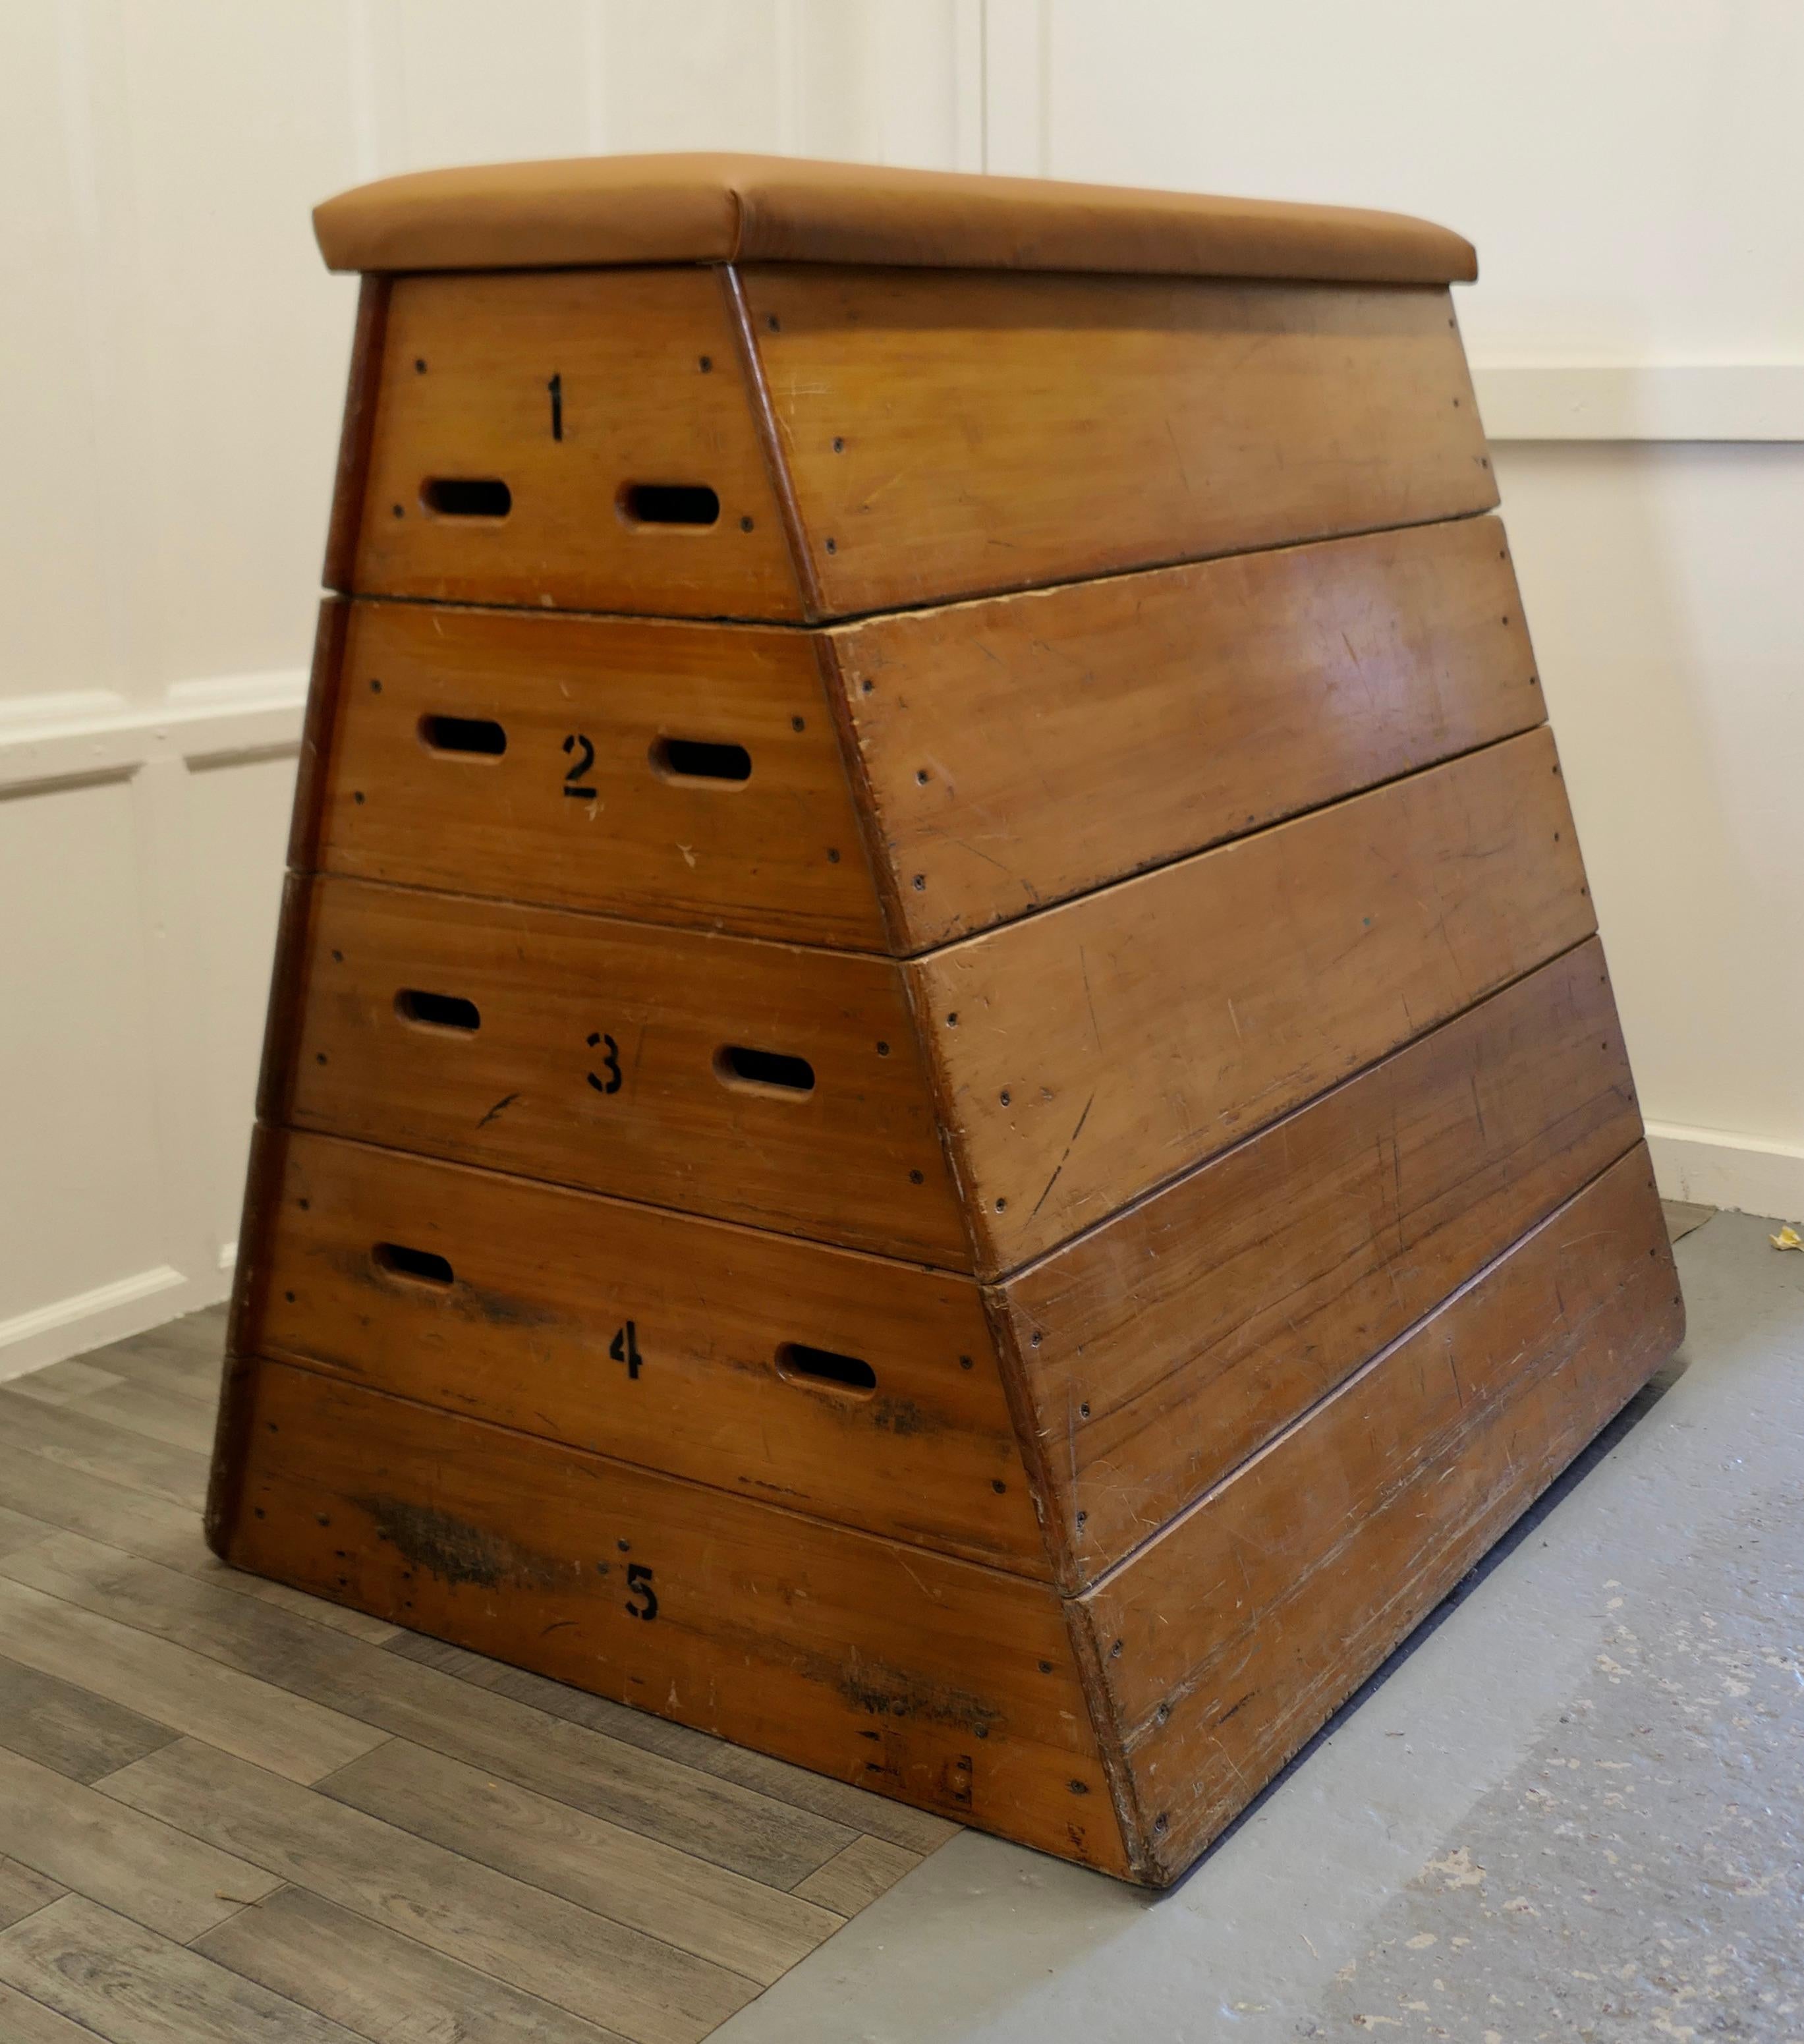 Large vintage 5 section heavy pine vaulting box

A Great find this box is a top end design dating from the1950s, large size with a retractable Transport system 
The box is in good sound condition and it has a new soft leather top and really lends